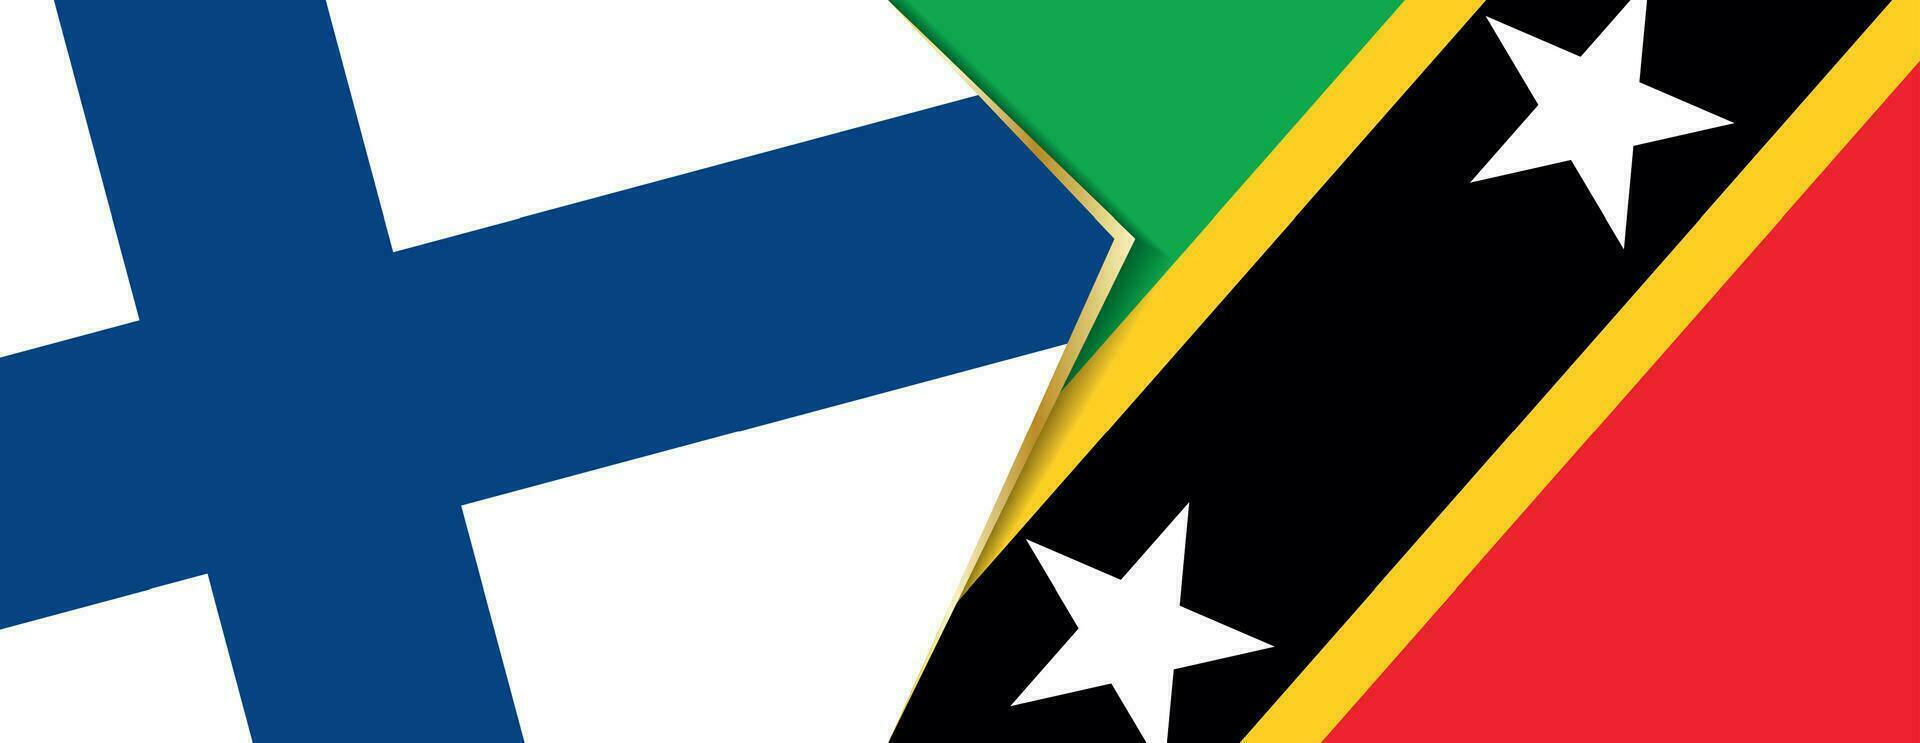 Finland and Saint Kitts and Nevis flags, two vector flags.